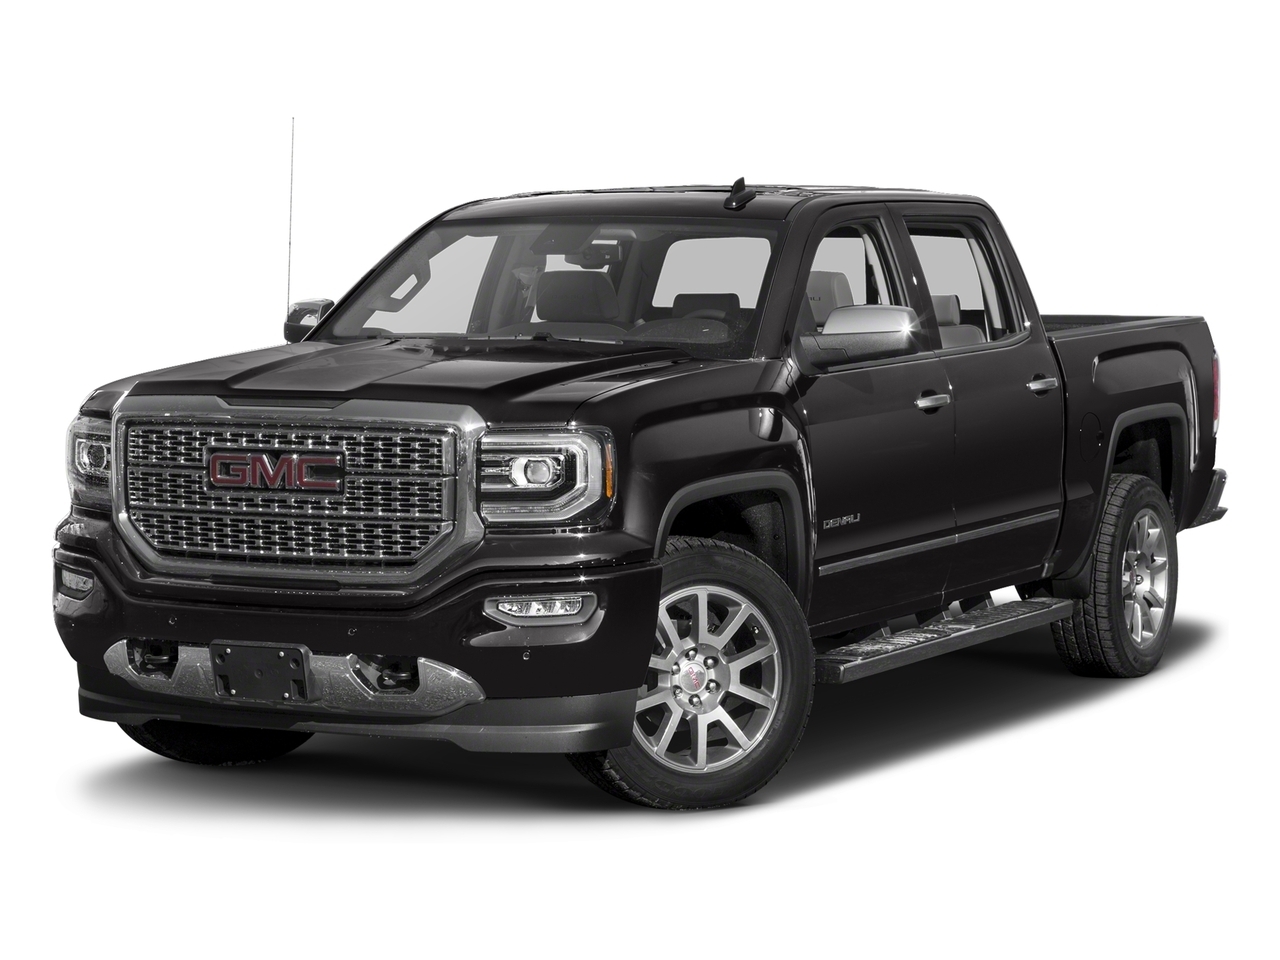 2018 GMC Sierra 1500 DENALI IN BLACK EQUIPPED WITH A 6.2L V8 , 4X4 , 8S